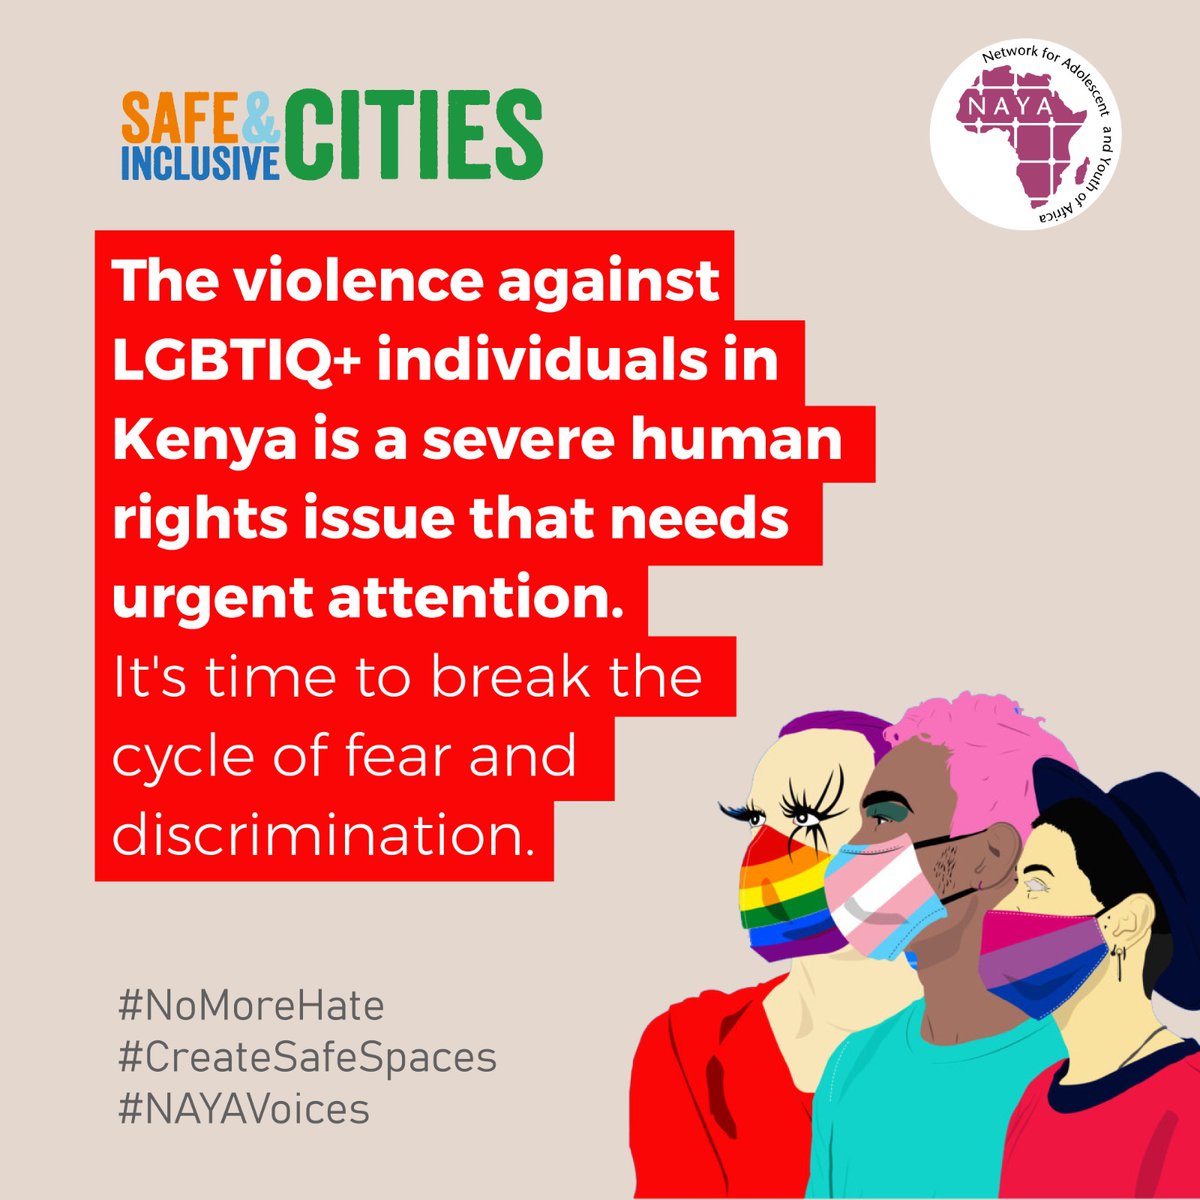 This IDAHOBIT, we shine a light on the importance of support and legal protections for LGBTIQ+ communities in Kenya. Everyone deserves to live without fear and with full dignity. #NoMoreHate #CreateSafeSpaces #NAYAVoices